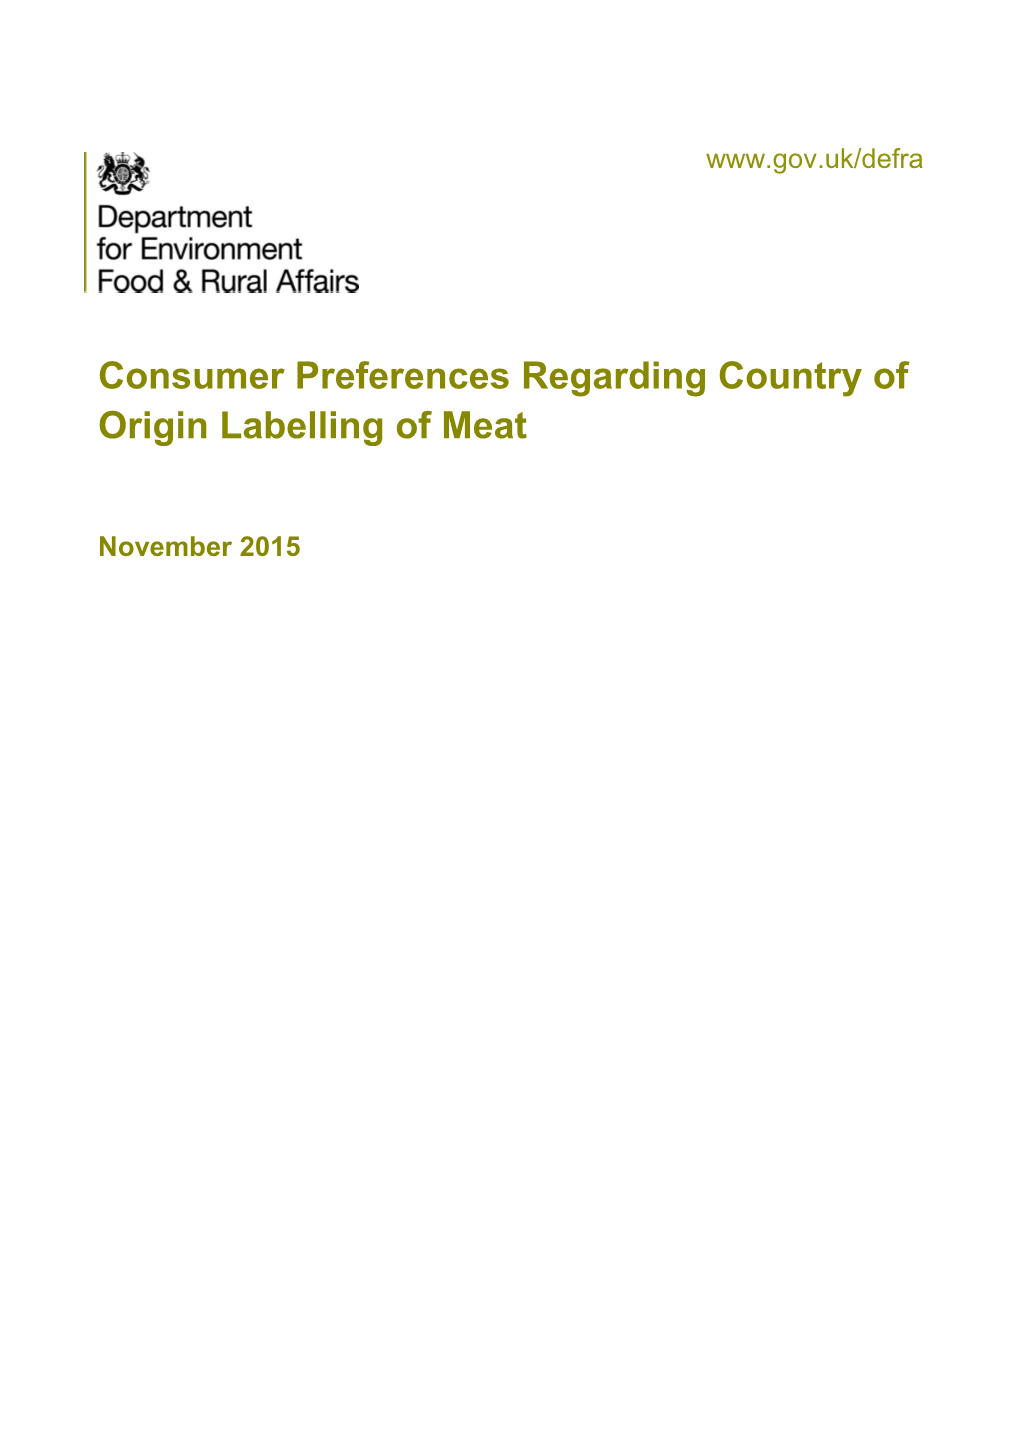 Consumer Preferences Regarding Country of Origin Labelling of Meat